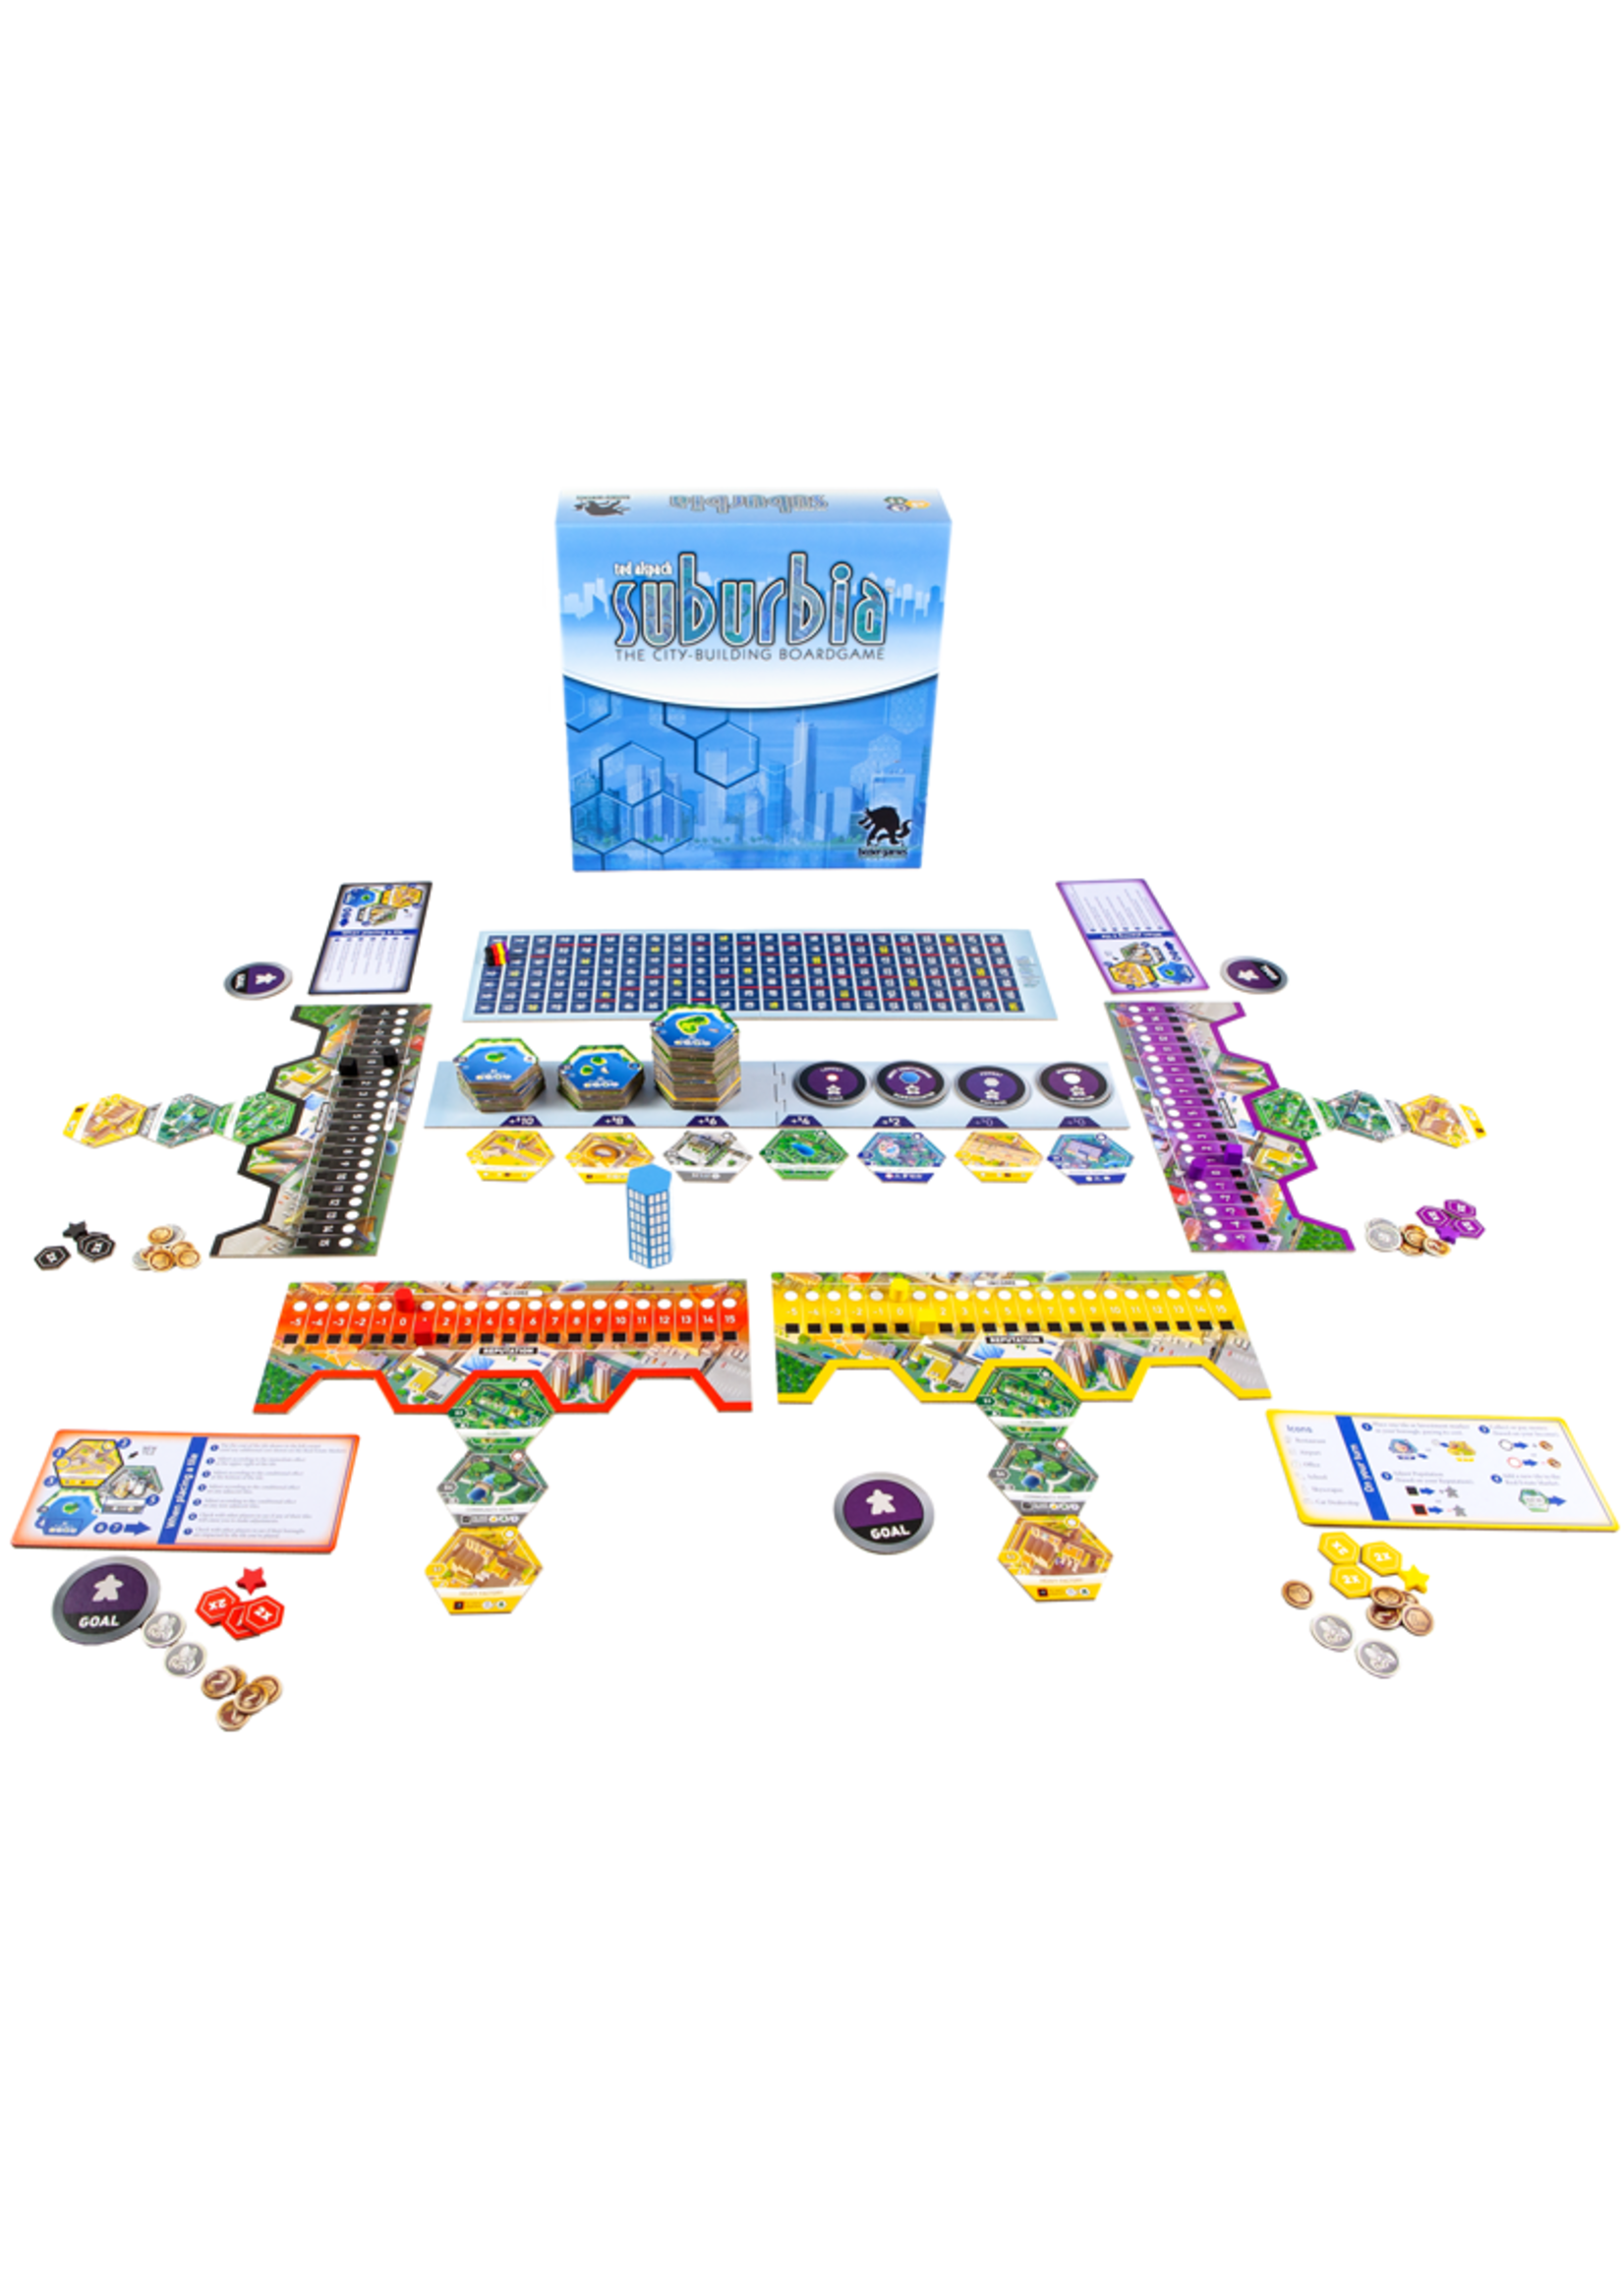 Bezier Games Suburbia (2nd Edition)